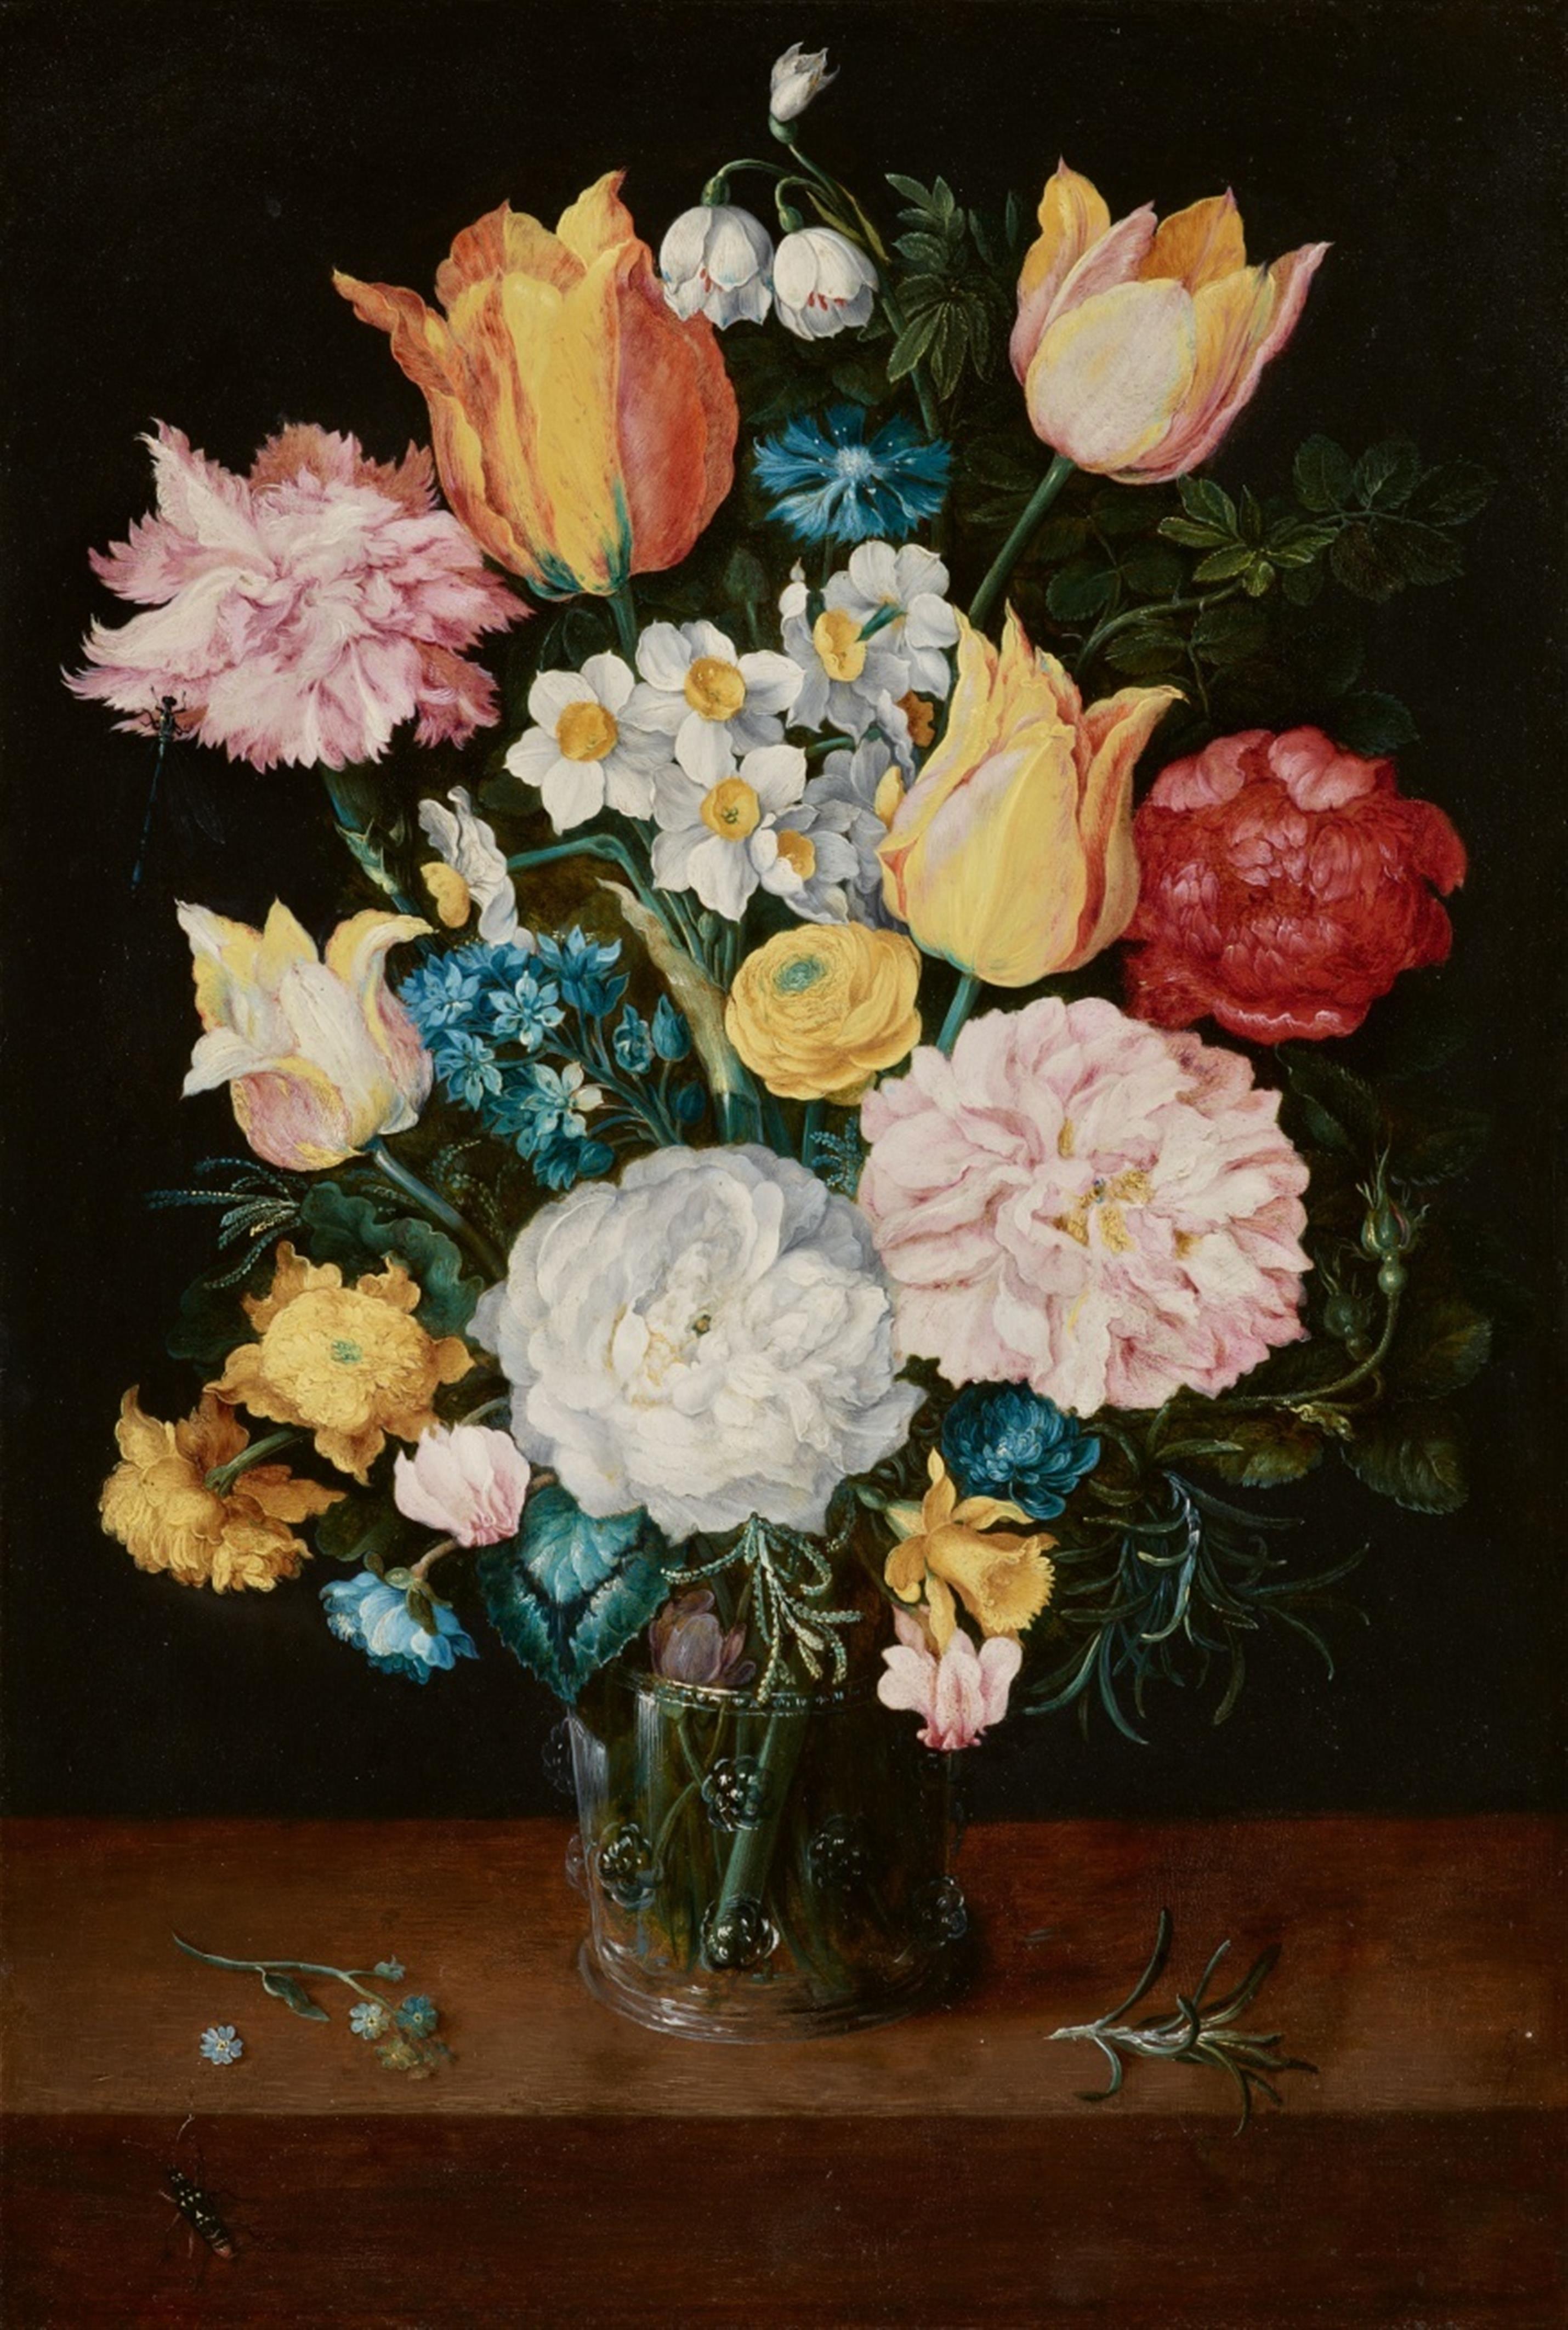 Jan Brueghel the Younger
Jan Brueghel the Elder - Still Life with Tulips, Roses, Narcissi, Forget-Me-Not and Other Flowers in a Glass Vase - image-1